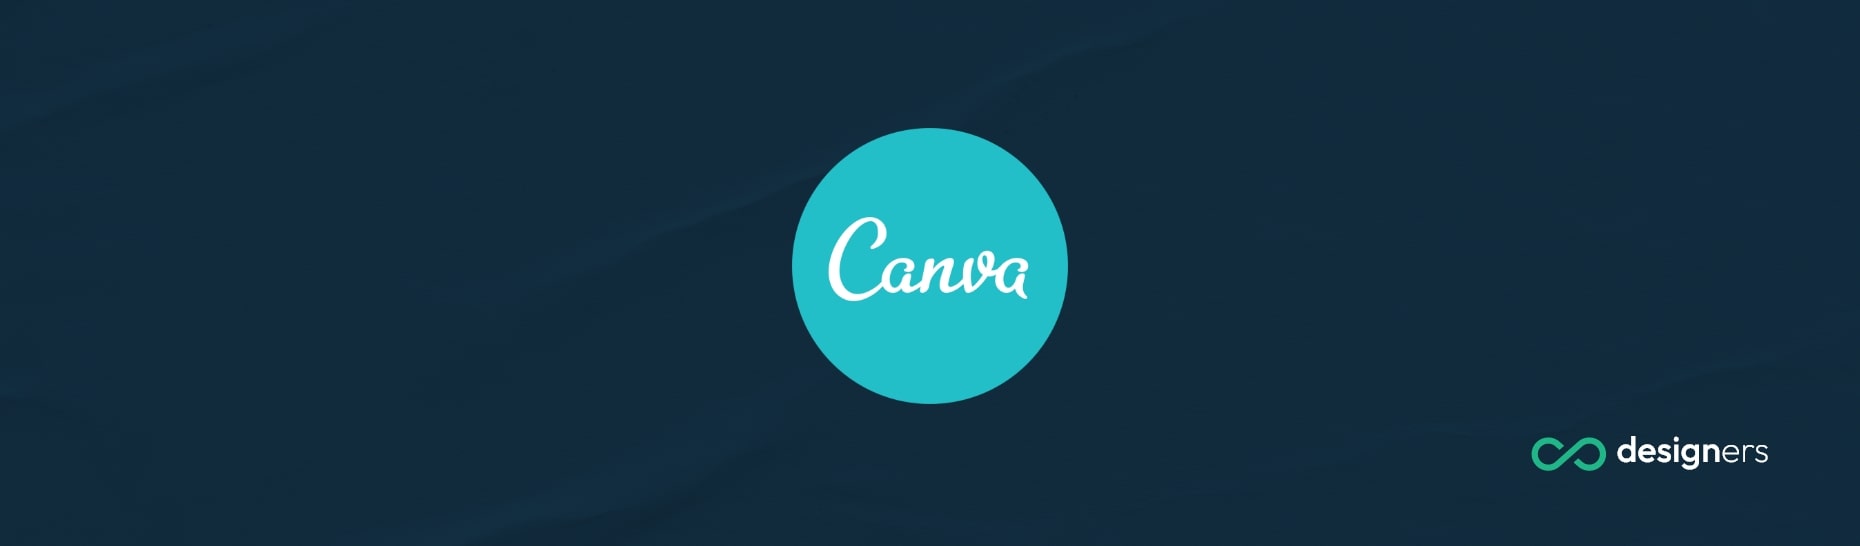 What Company Owns Canva?